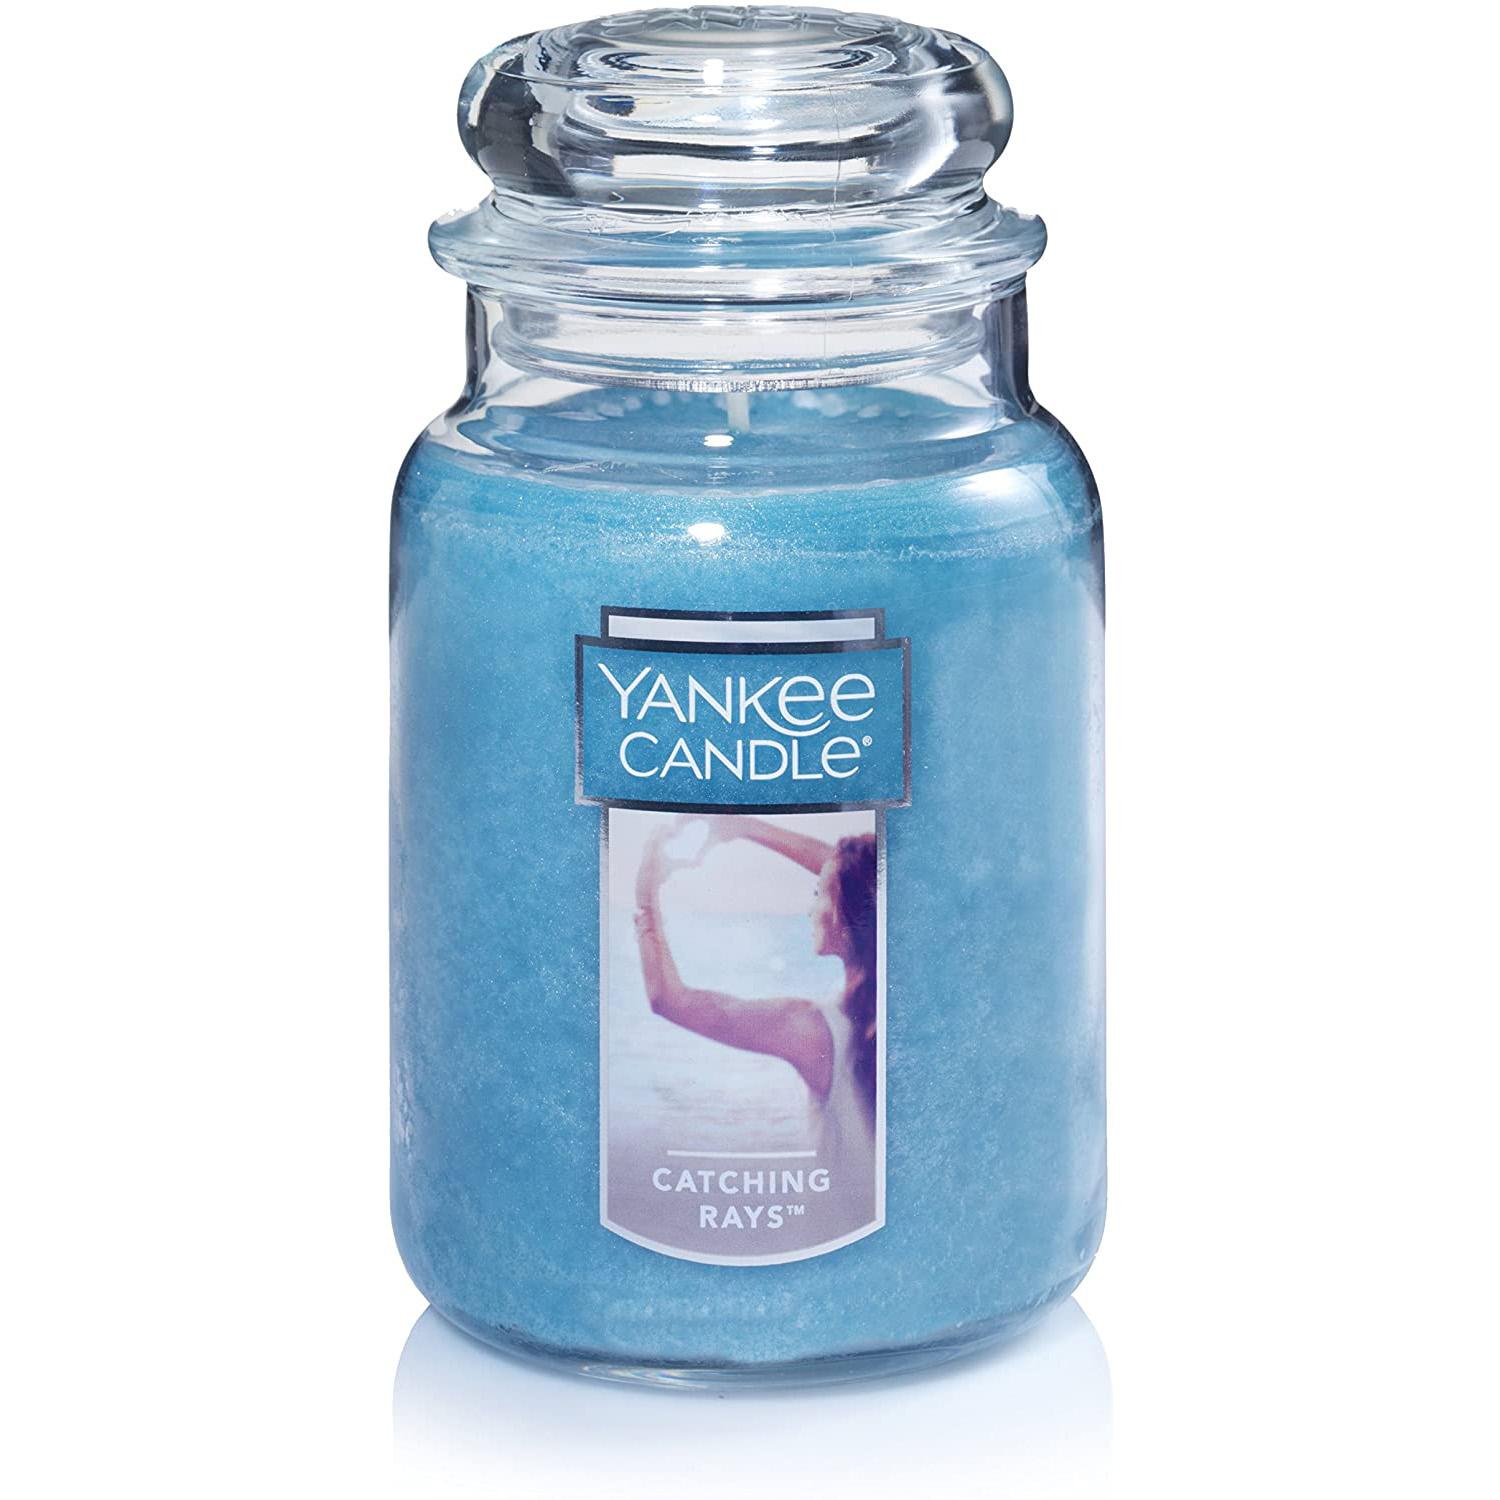 Yankee Candle Large Jar Candle for $15.60